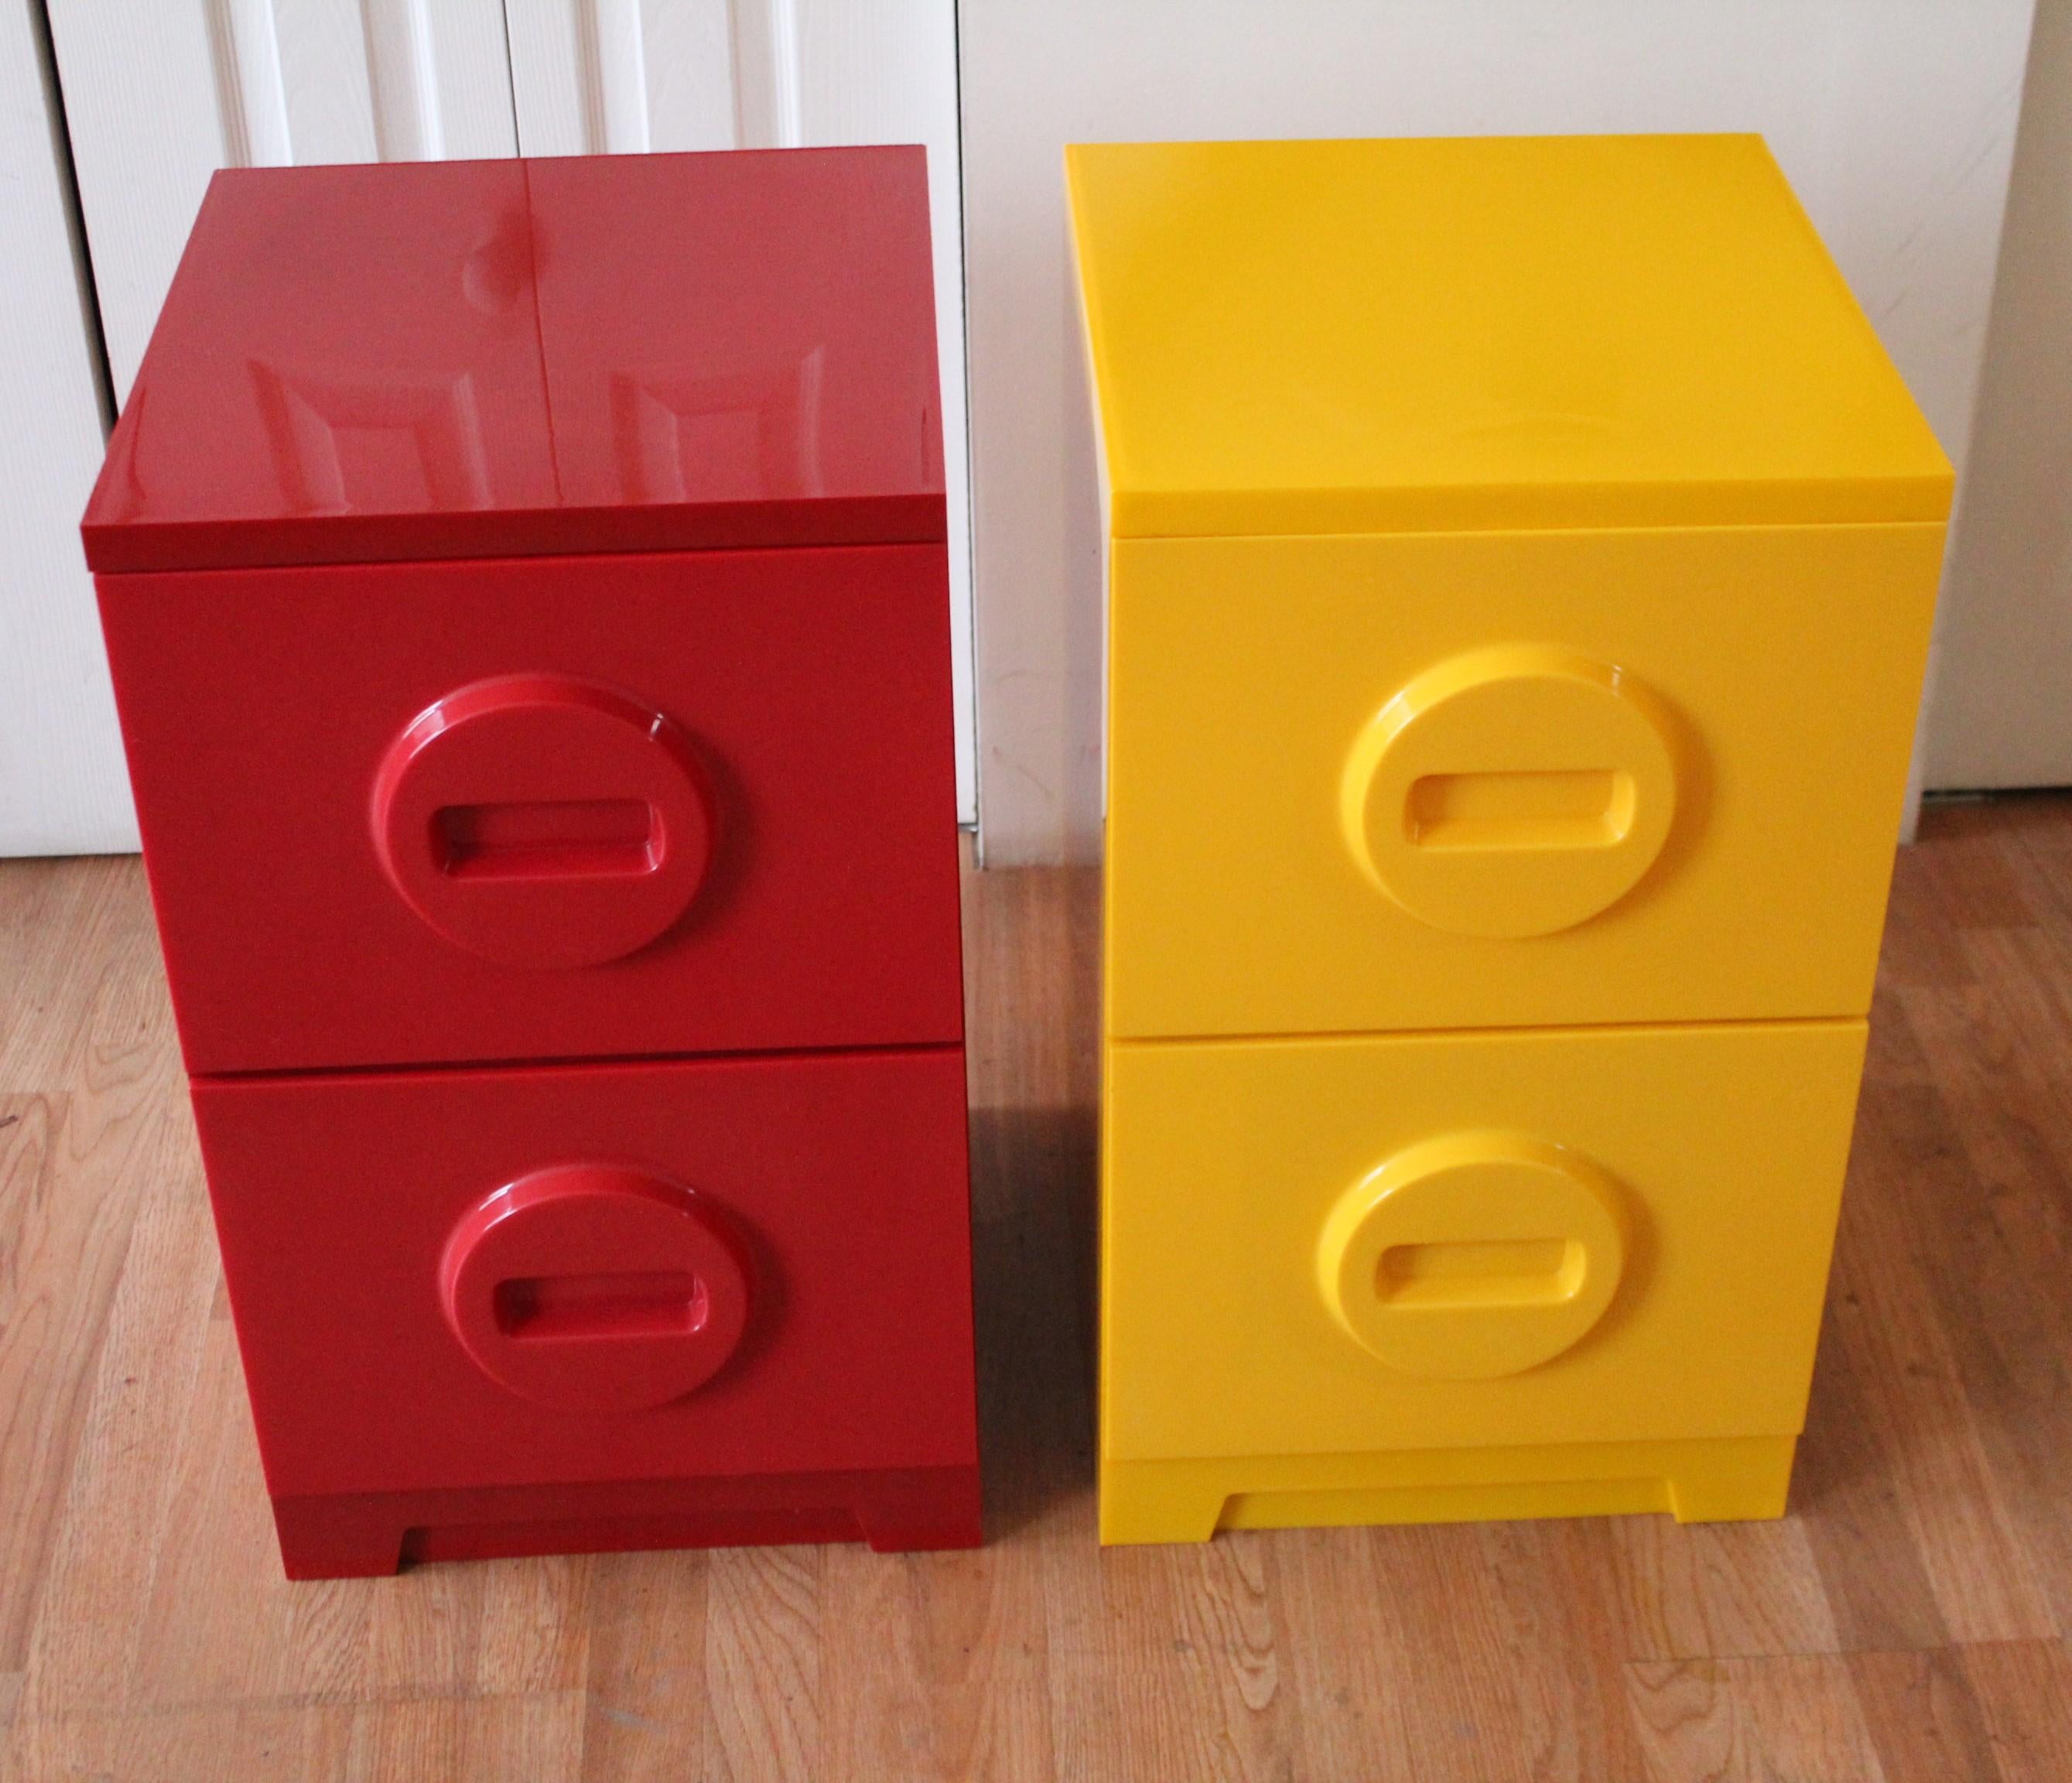 Late 20th Century Mid-Century Modern Yellow Red Plastic Akro-Mils Filing Cabinet